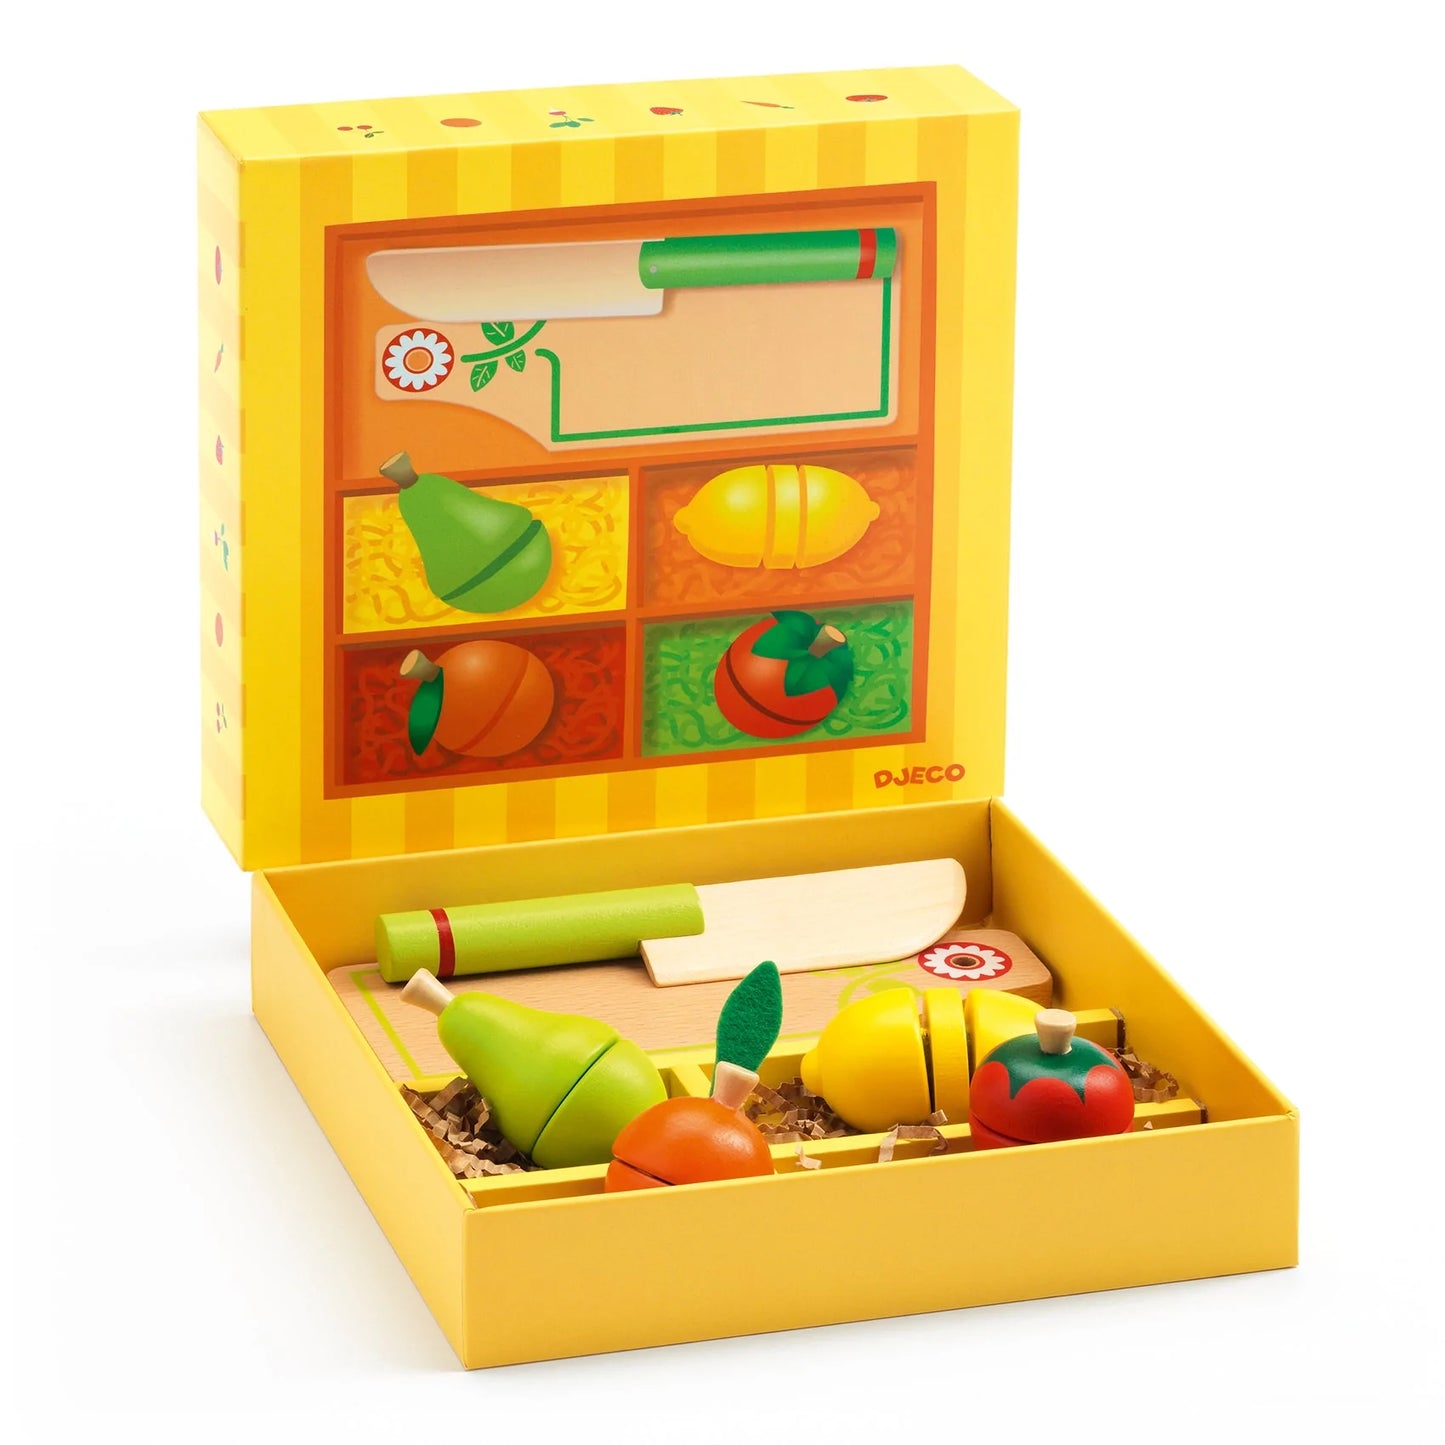 Fruit and Vegetables Cutting Play Set